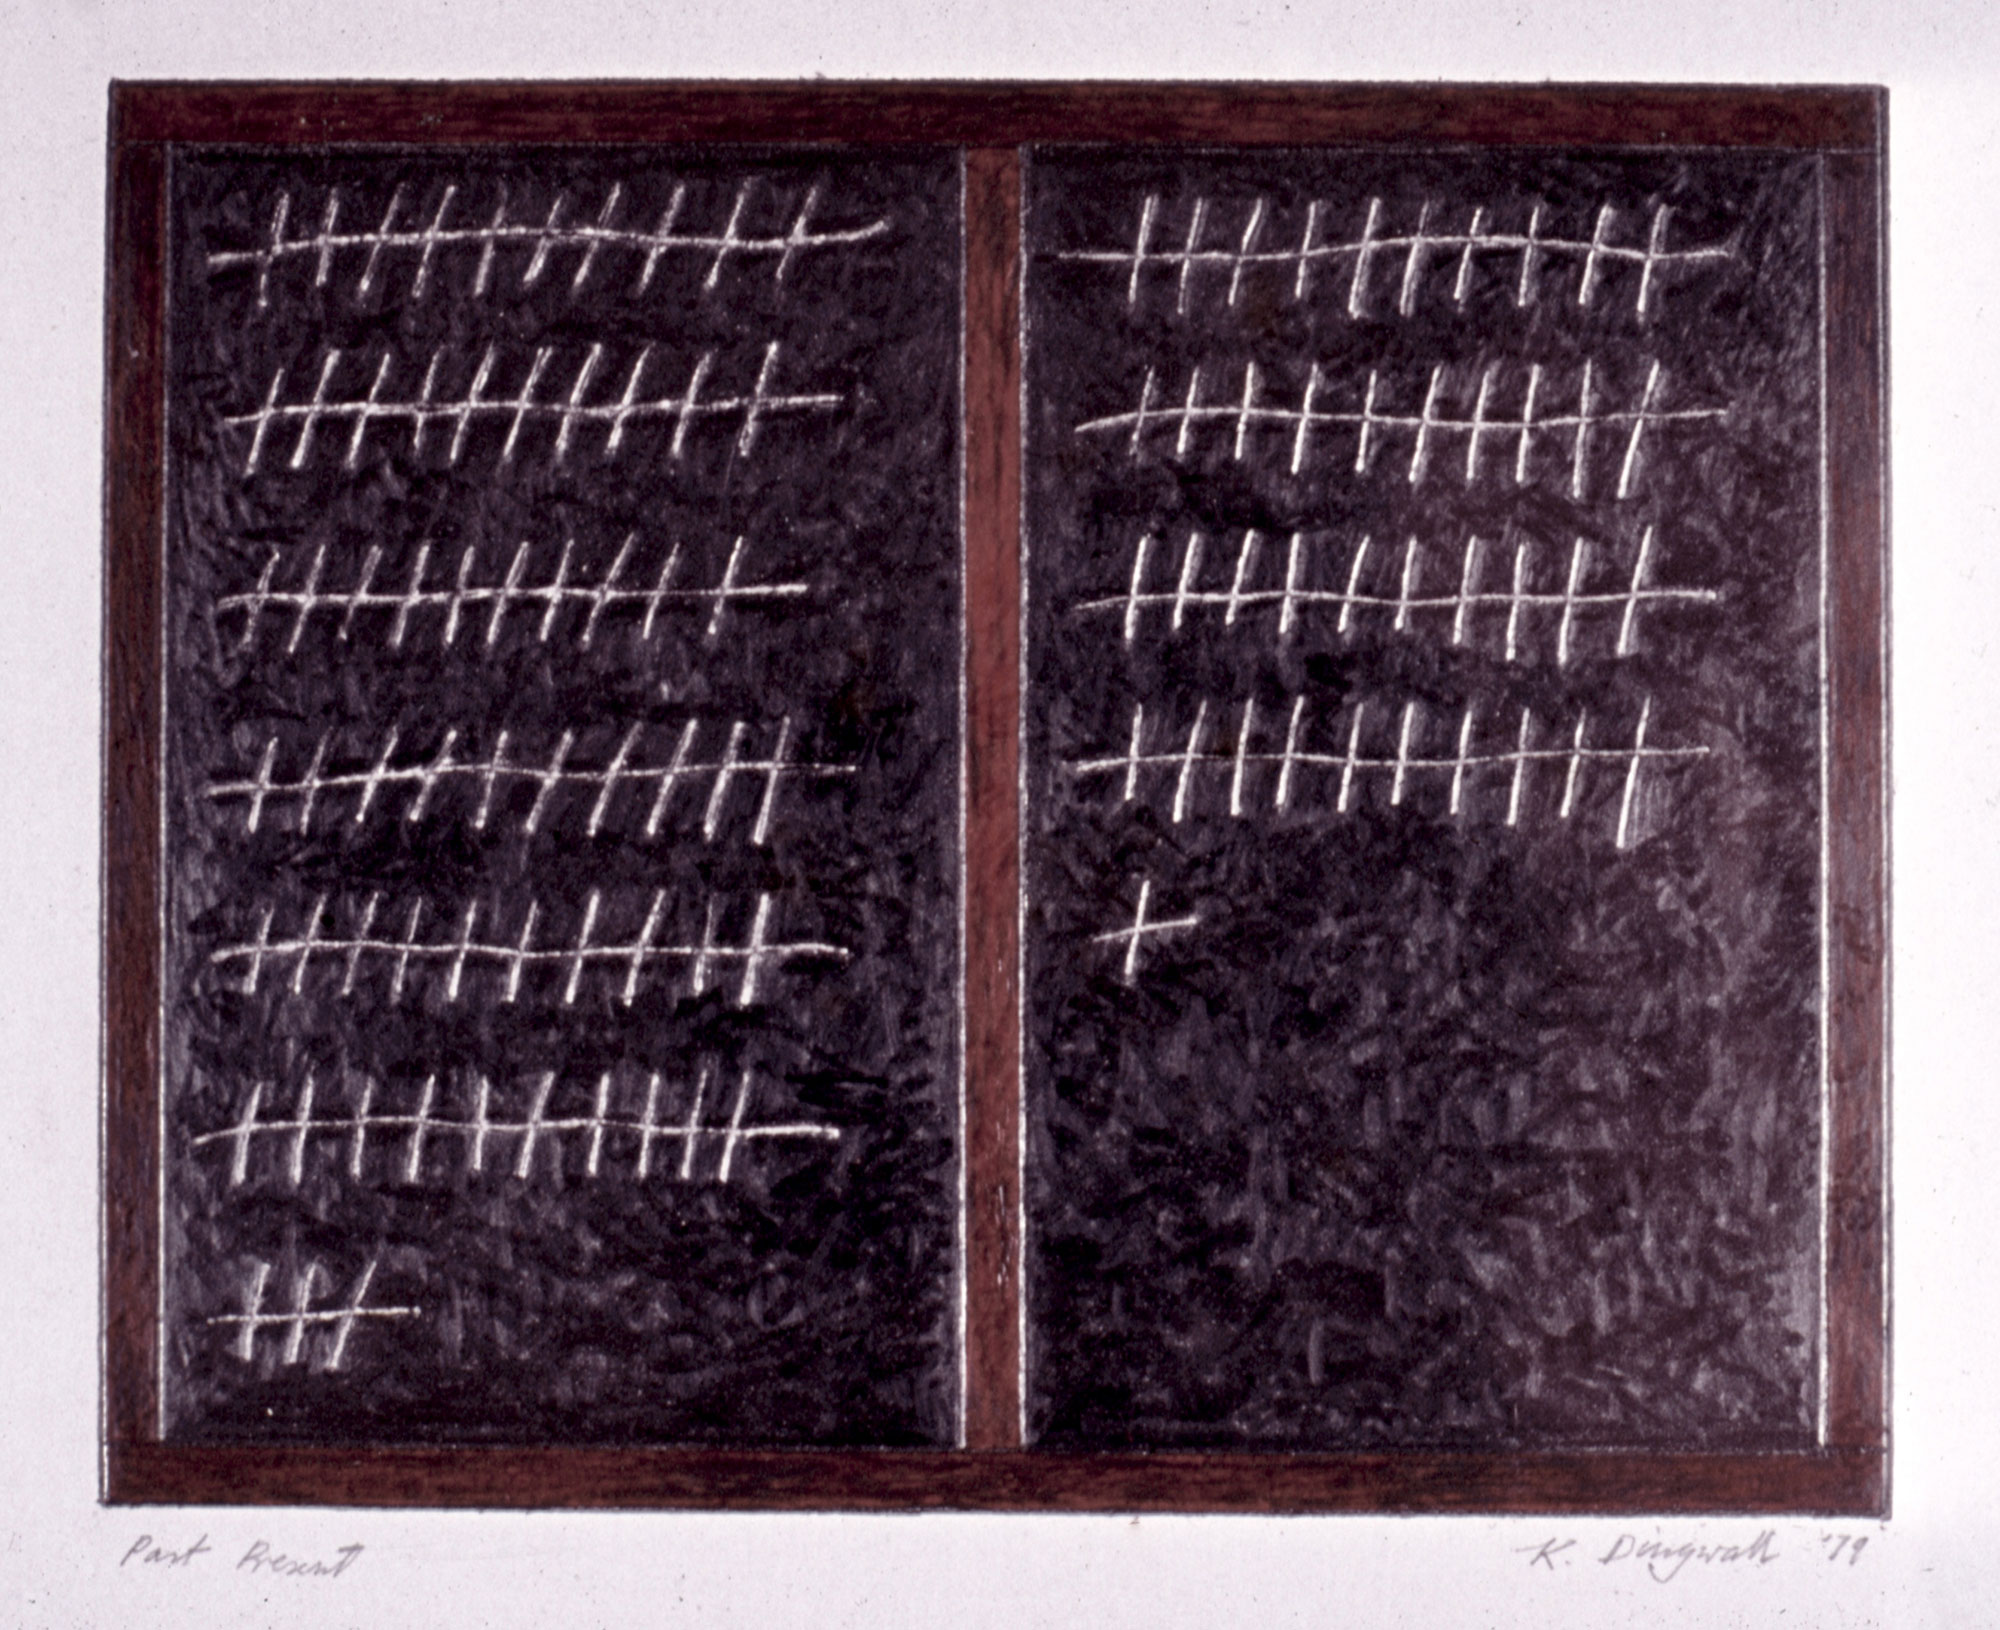 Kenneth Dingwall, Past Present, 1979, graphite and acrylic on paper, 19cm x 24cm